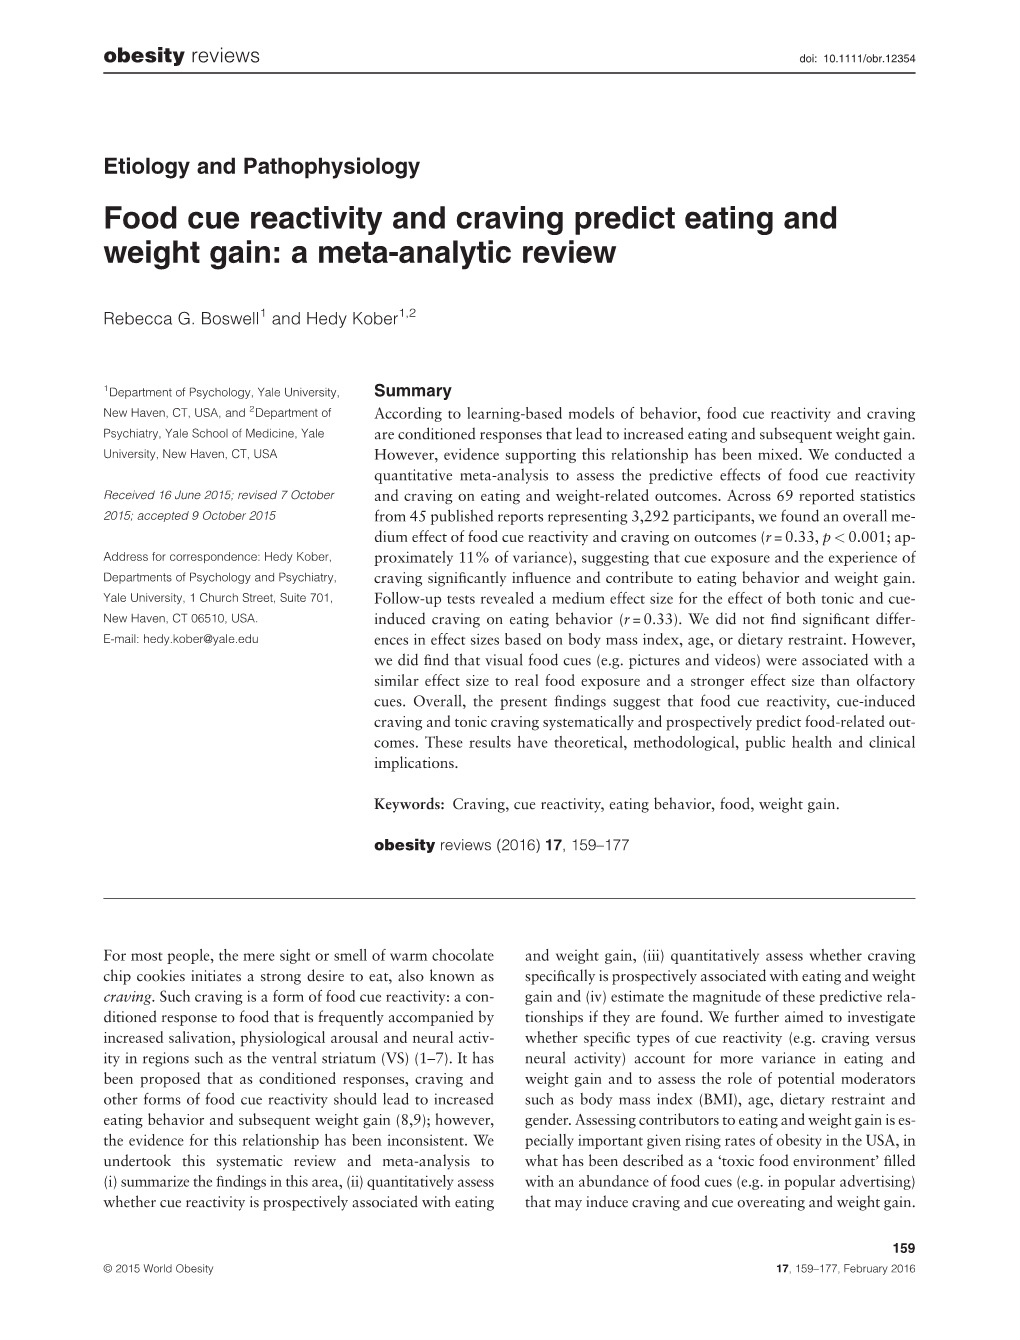 Food Cue Reactivity and Craving Predict Eating and Weight Gain: a Meta-Analytic Review